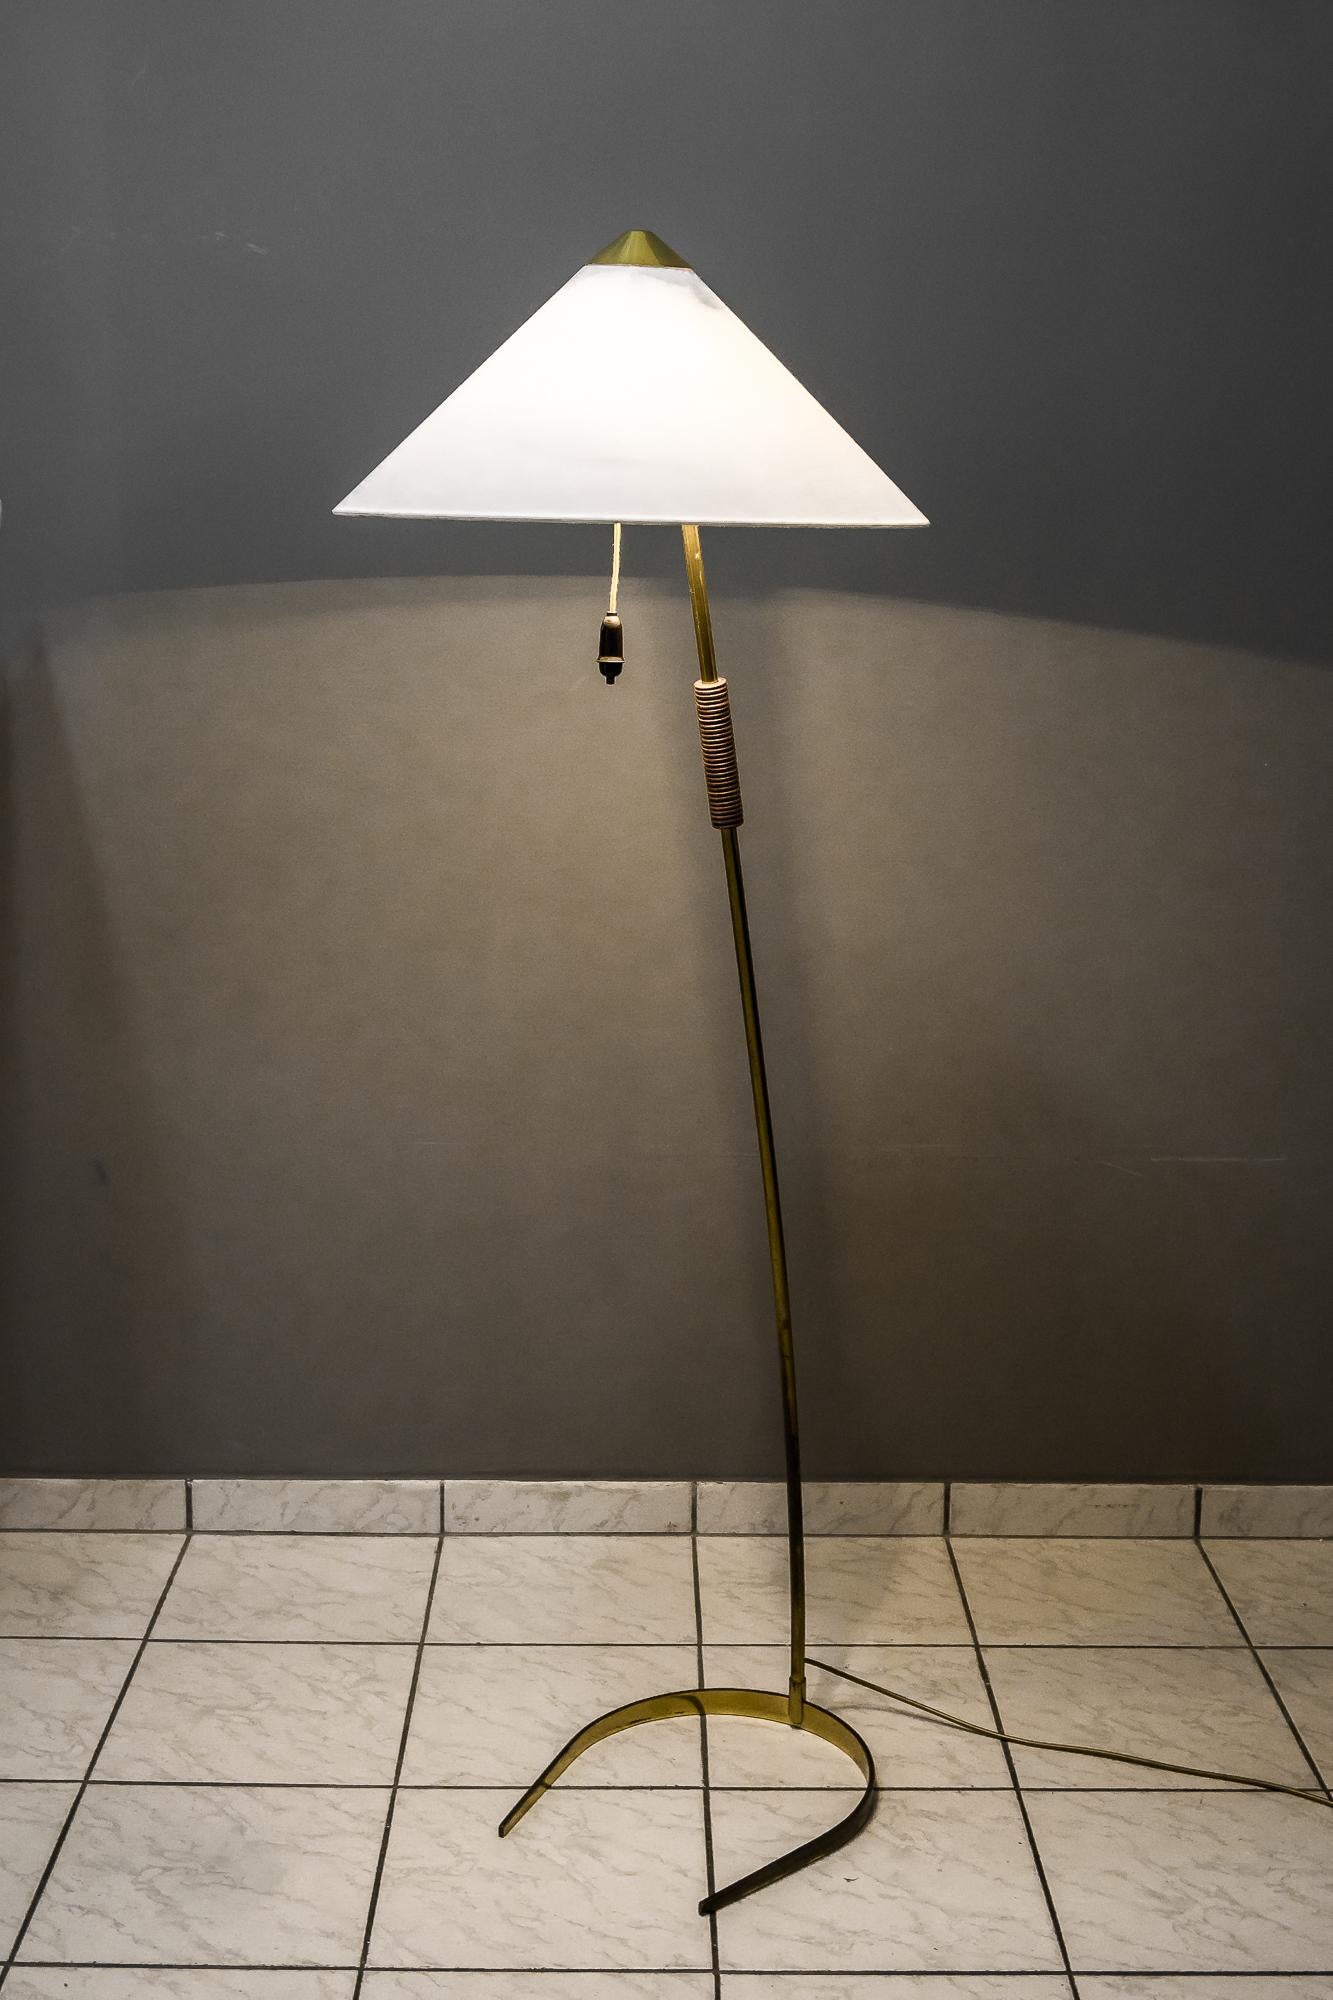 Rupert Nikoll floor lamp with wood handle, circa 1950s
Original condition
The shade is new. (is modeled after the original dimensions.).